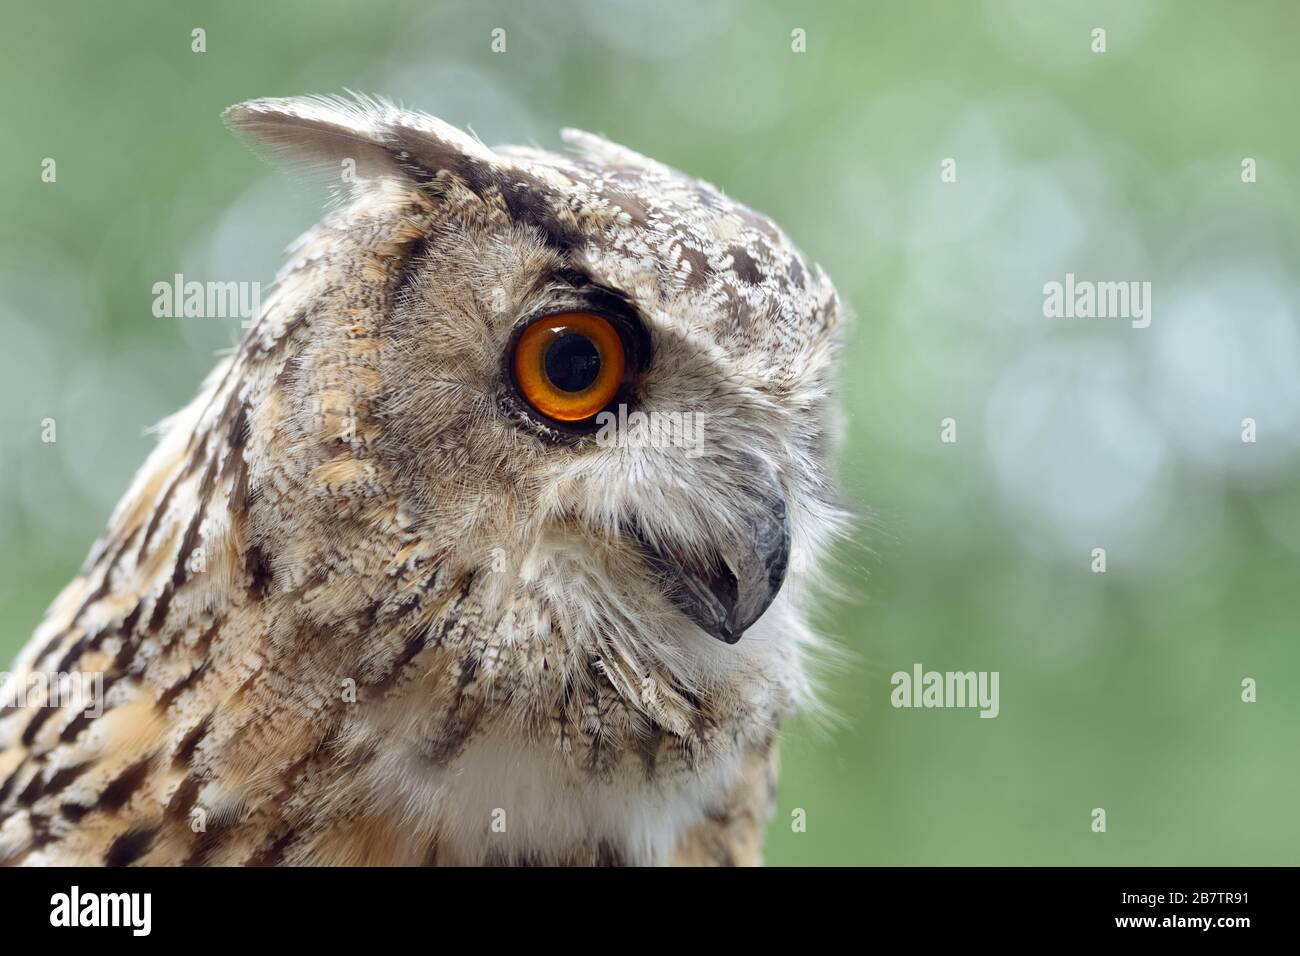 Eurasian Eagle-Owl ( Bubo bubo ), also called Northern Eagle Owl, European Eagle-Owl or just Eagle Owl, adult, watching attentively, side view, Europe Stock Photo